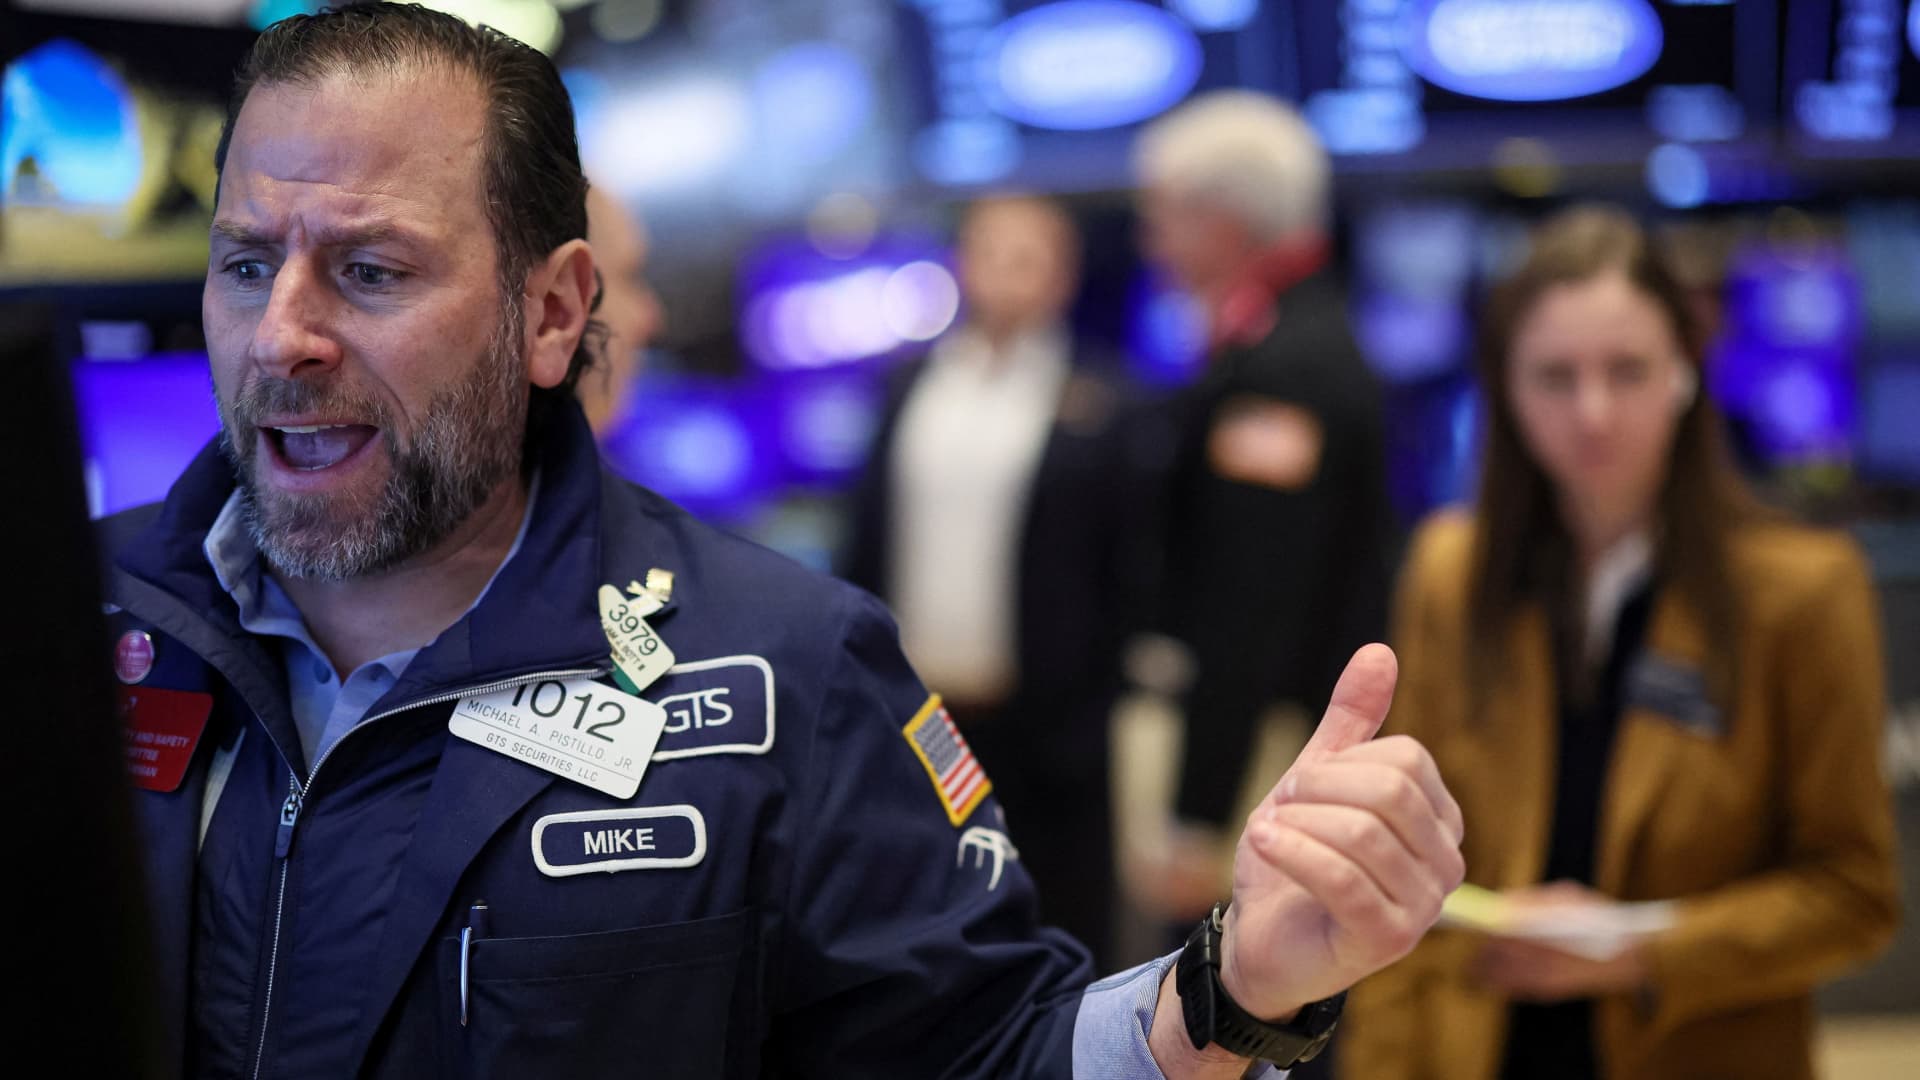 Jim Cramer says the stock market rally has stalled because of two important reasons